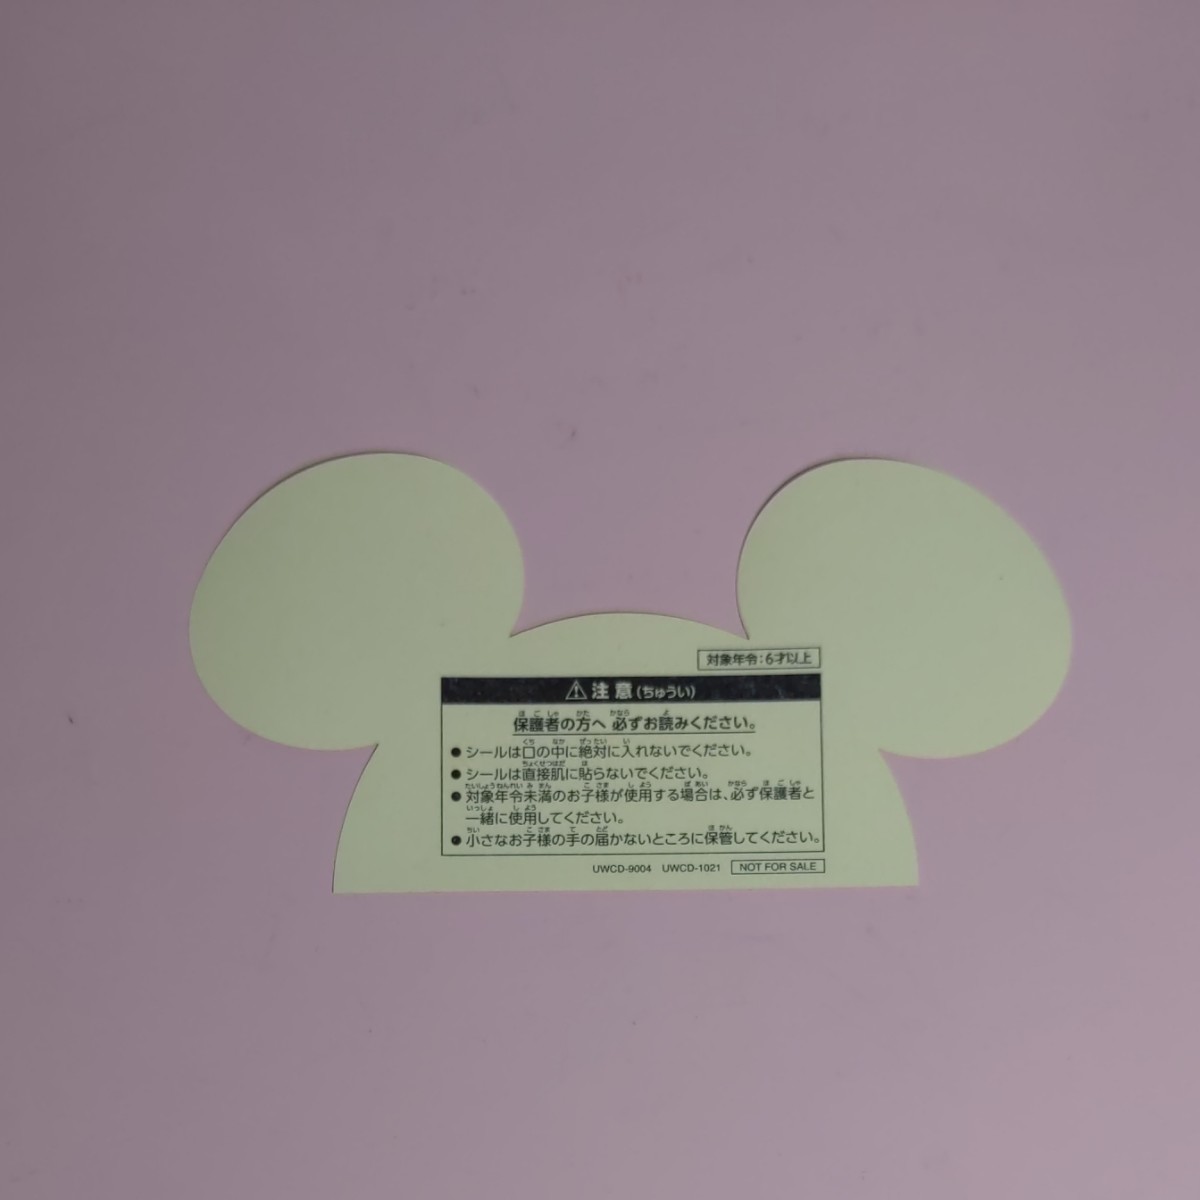 CONNECTED to Disney 通常盤 初回生産分